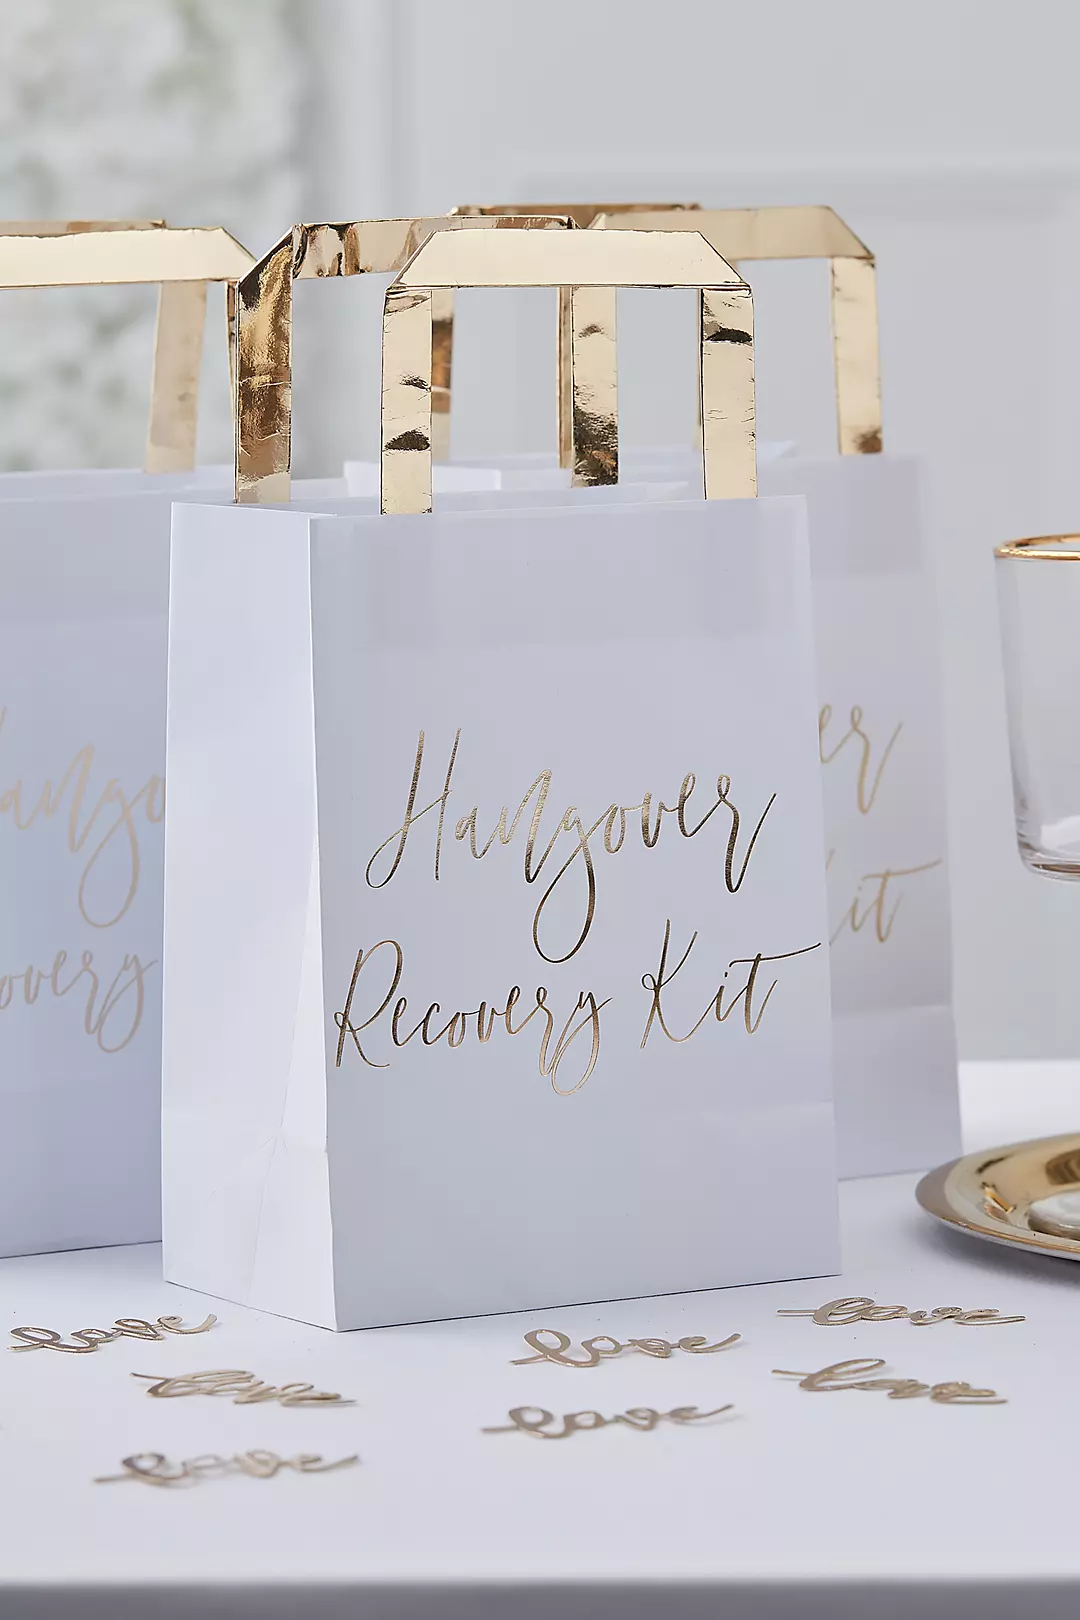 Gold Foil Hangover Recovery Kit Bags Image